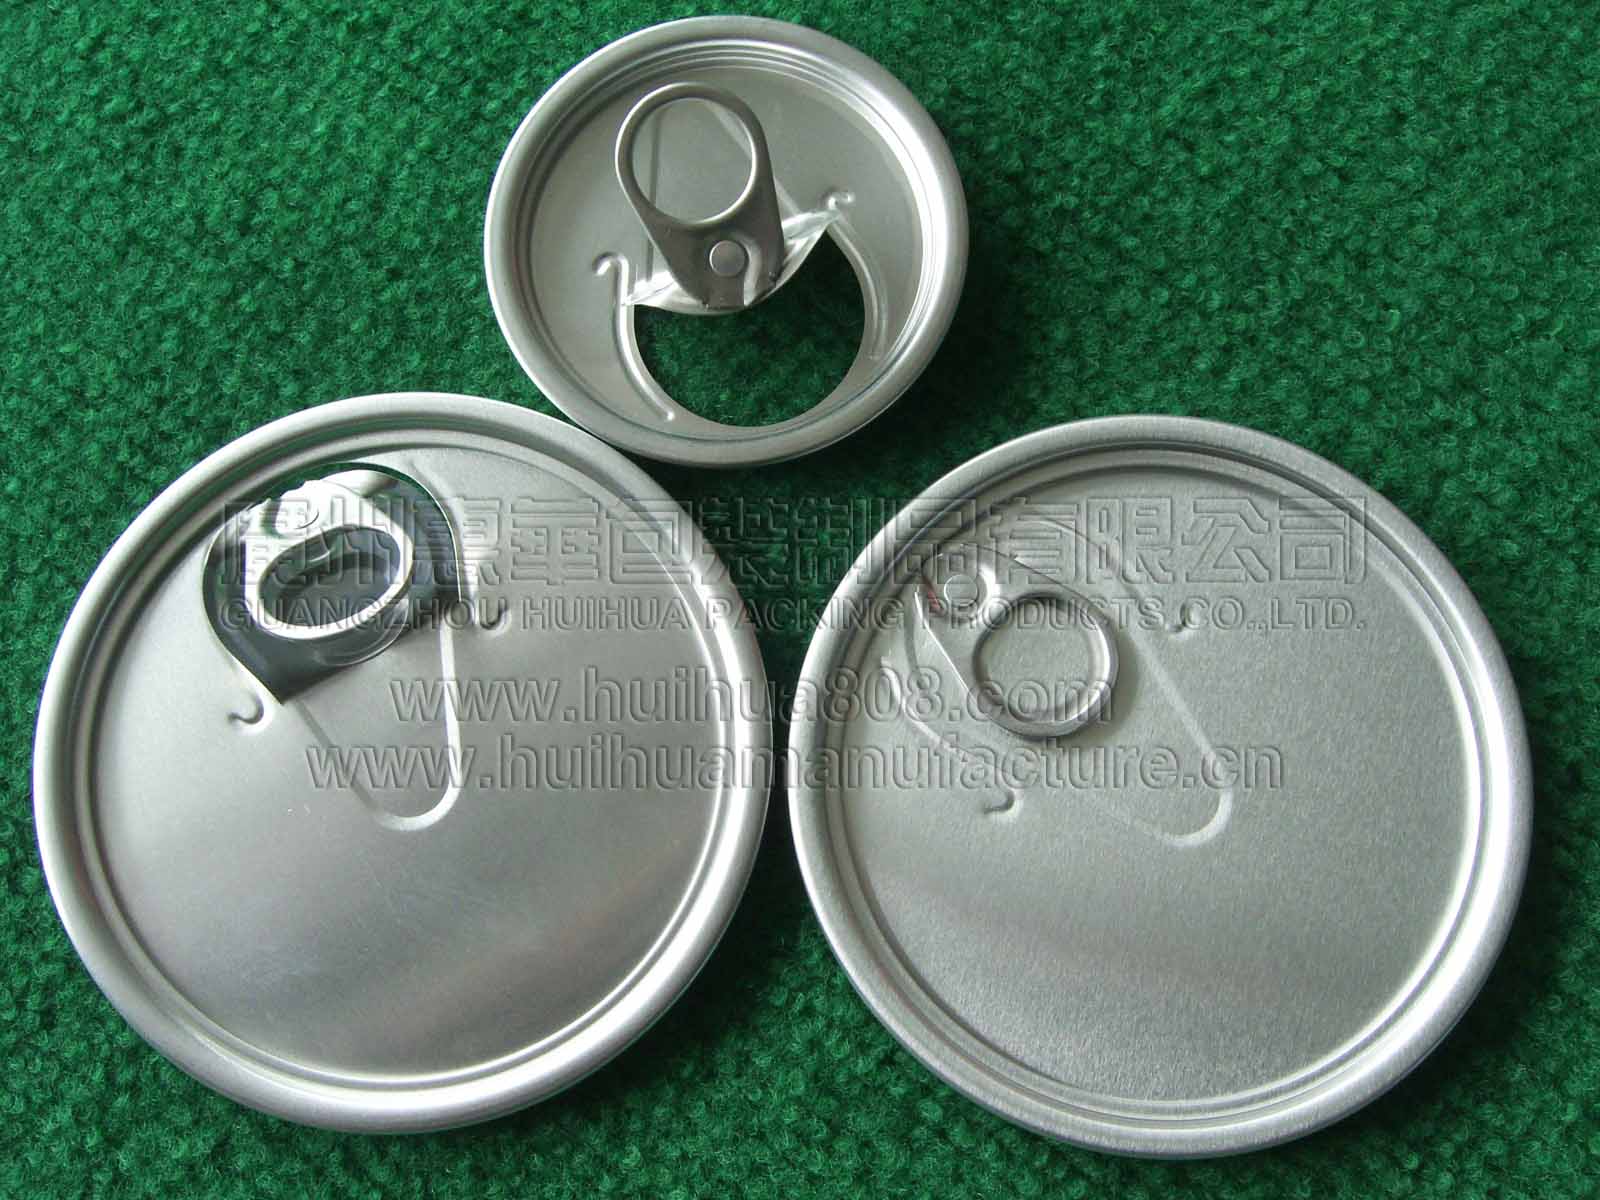 Supply to pull the cover, aluminum alloy tinplate easy pull cover